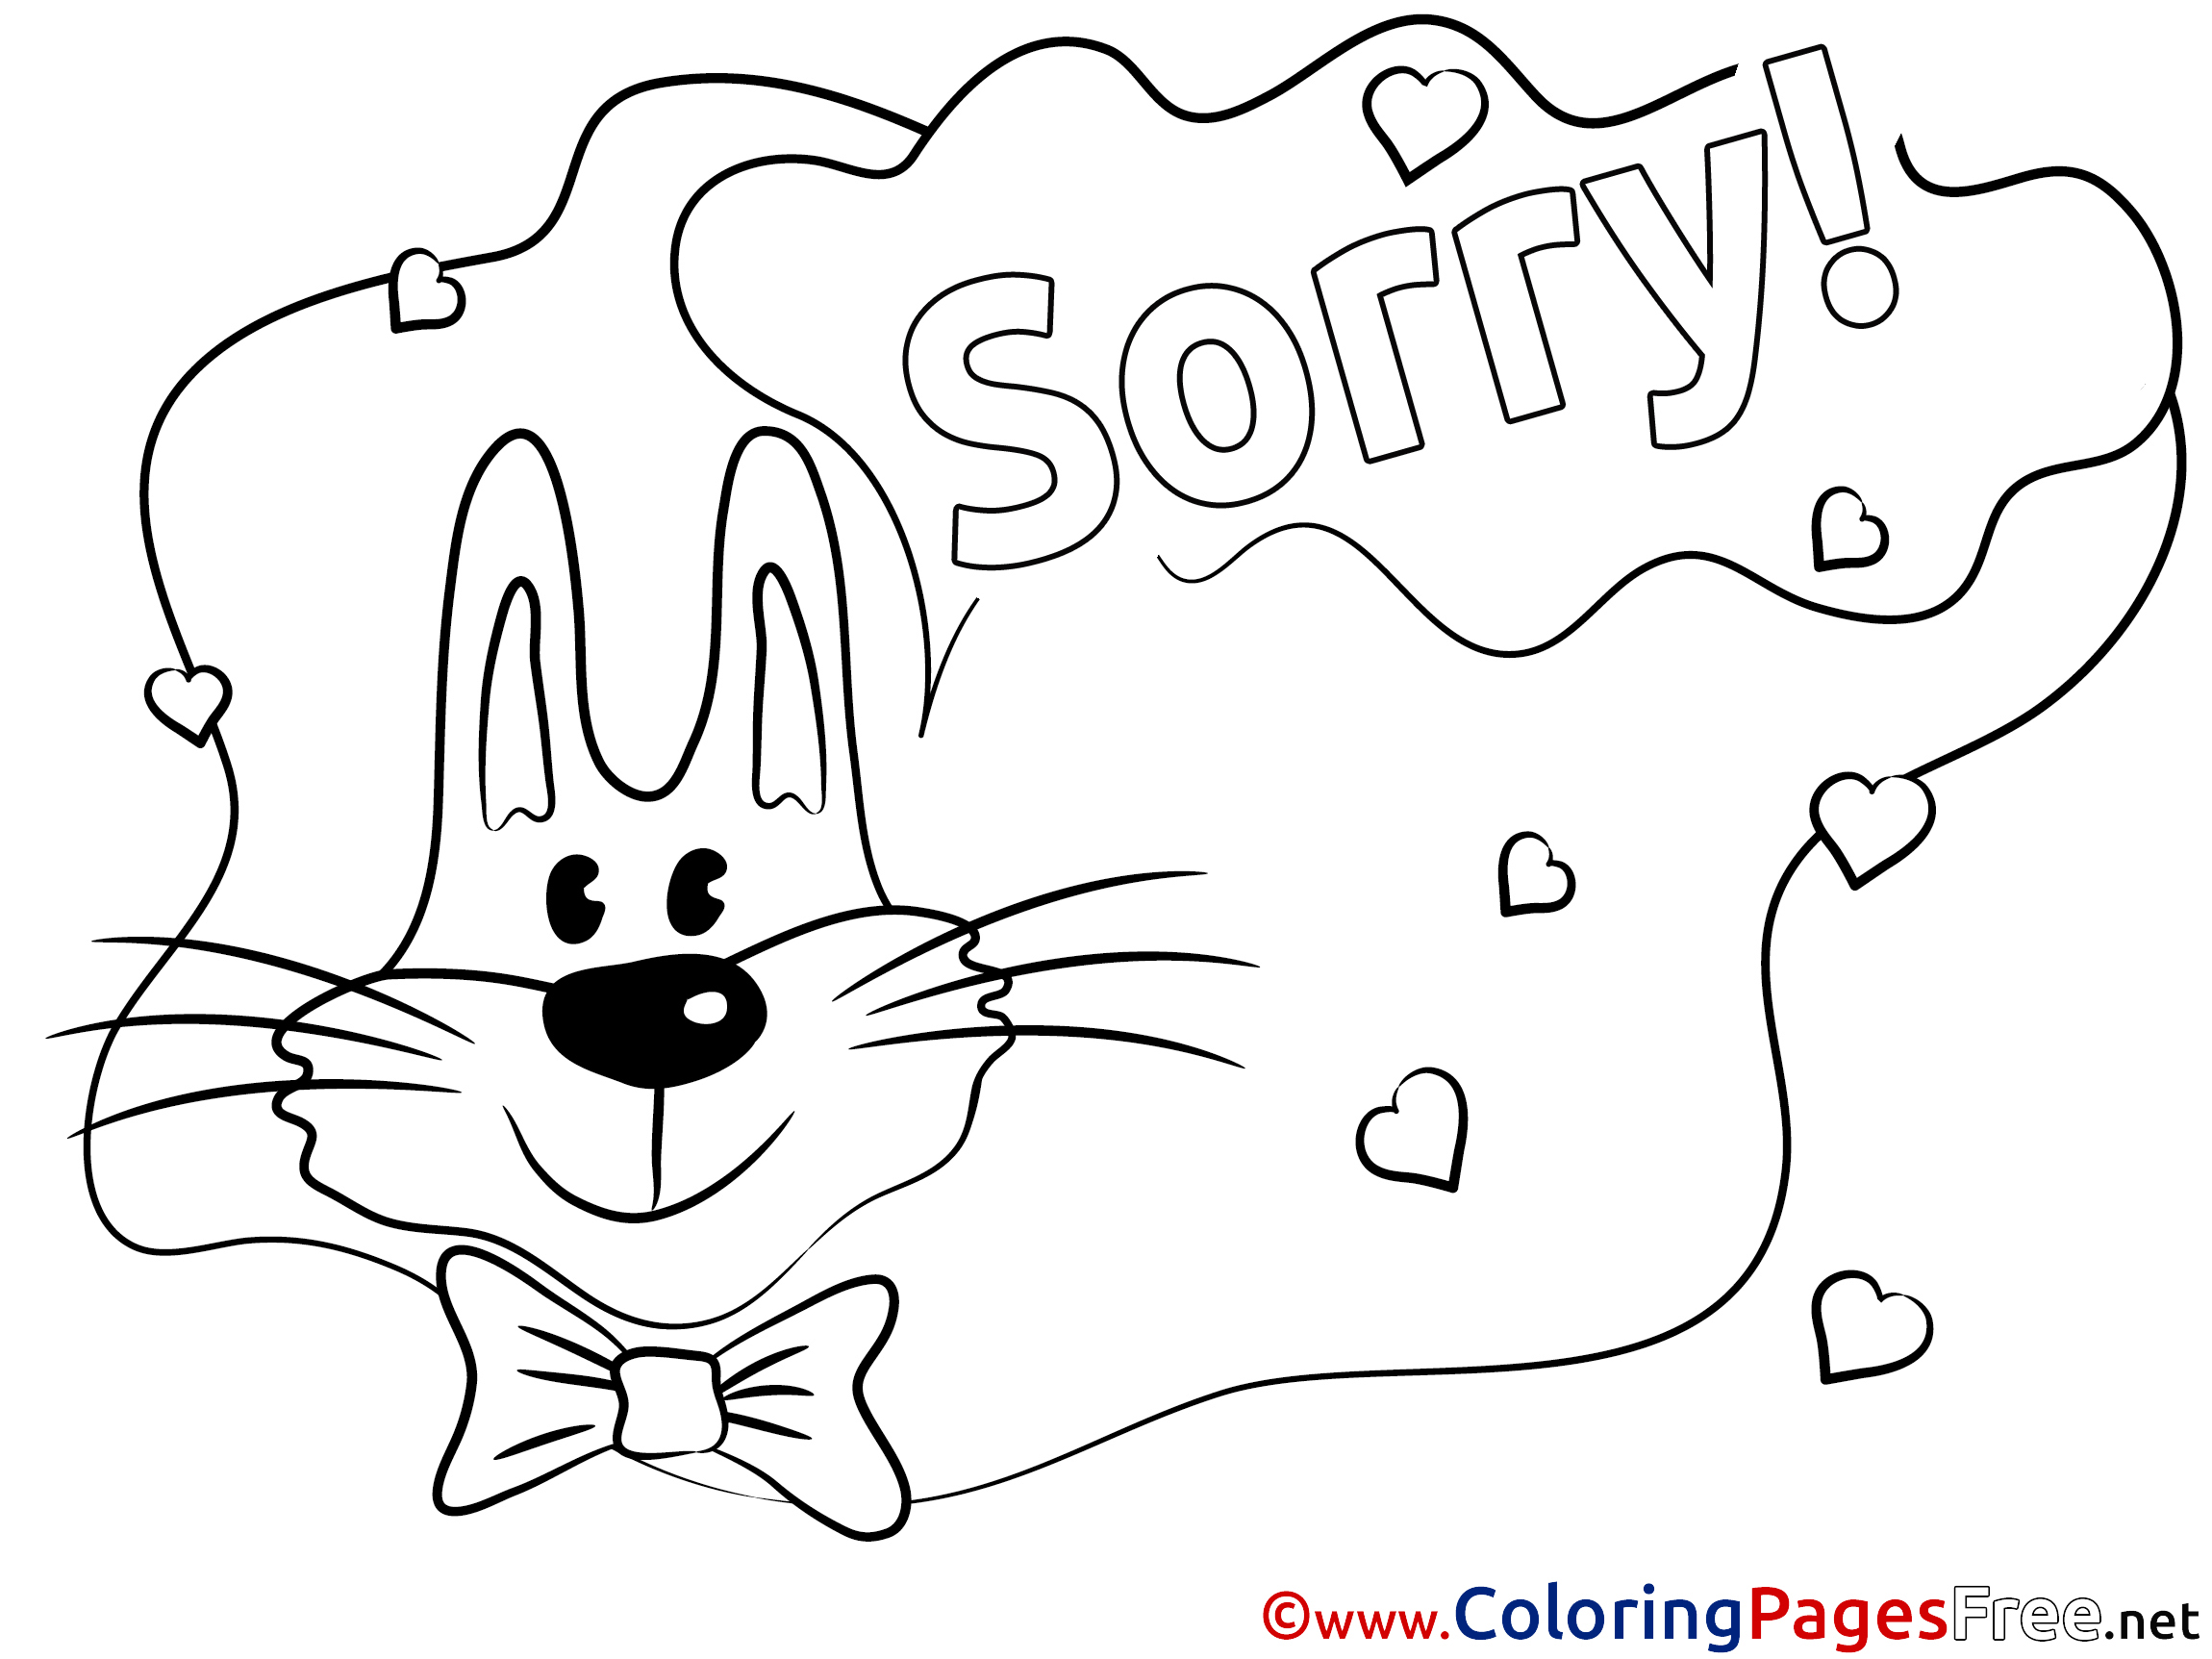 rabbit-sorry-coloring-pages-free